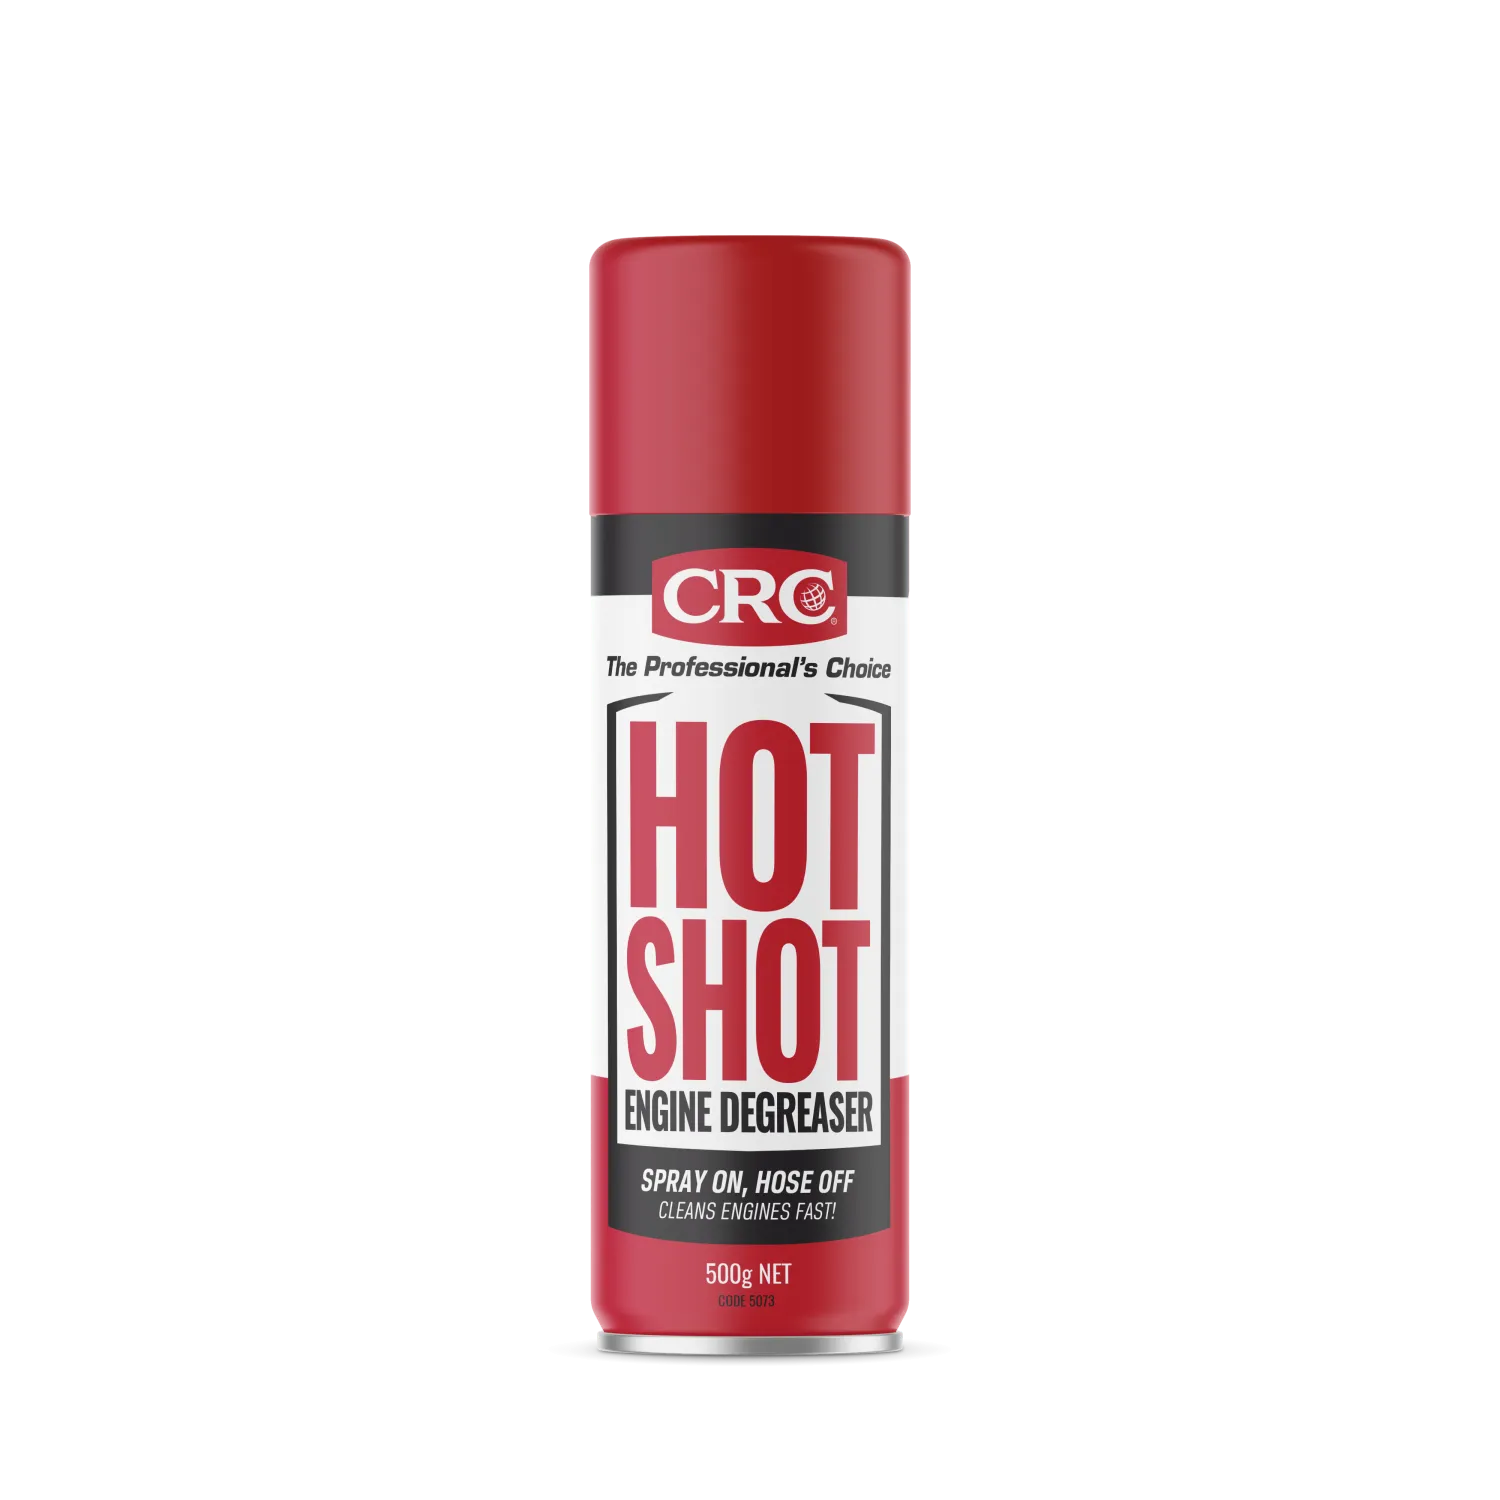 CRC Hot Shot Degreaser 500g | Product Code : 5073 - South East Clearance Centre